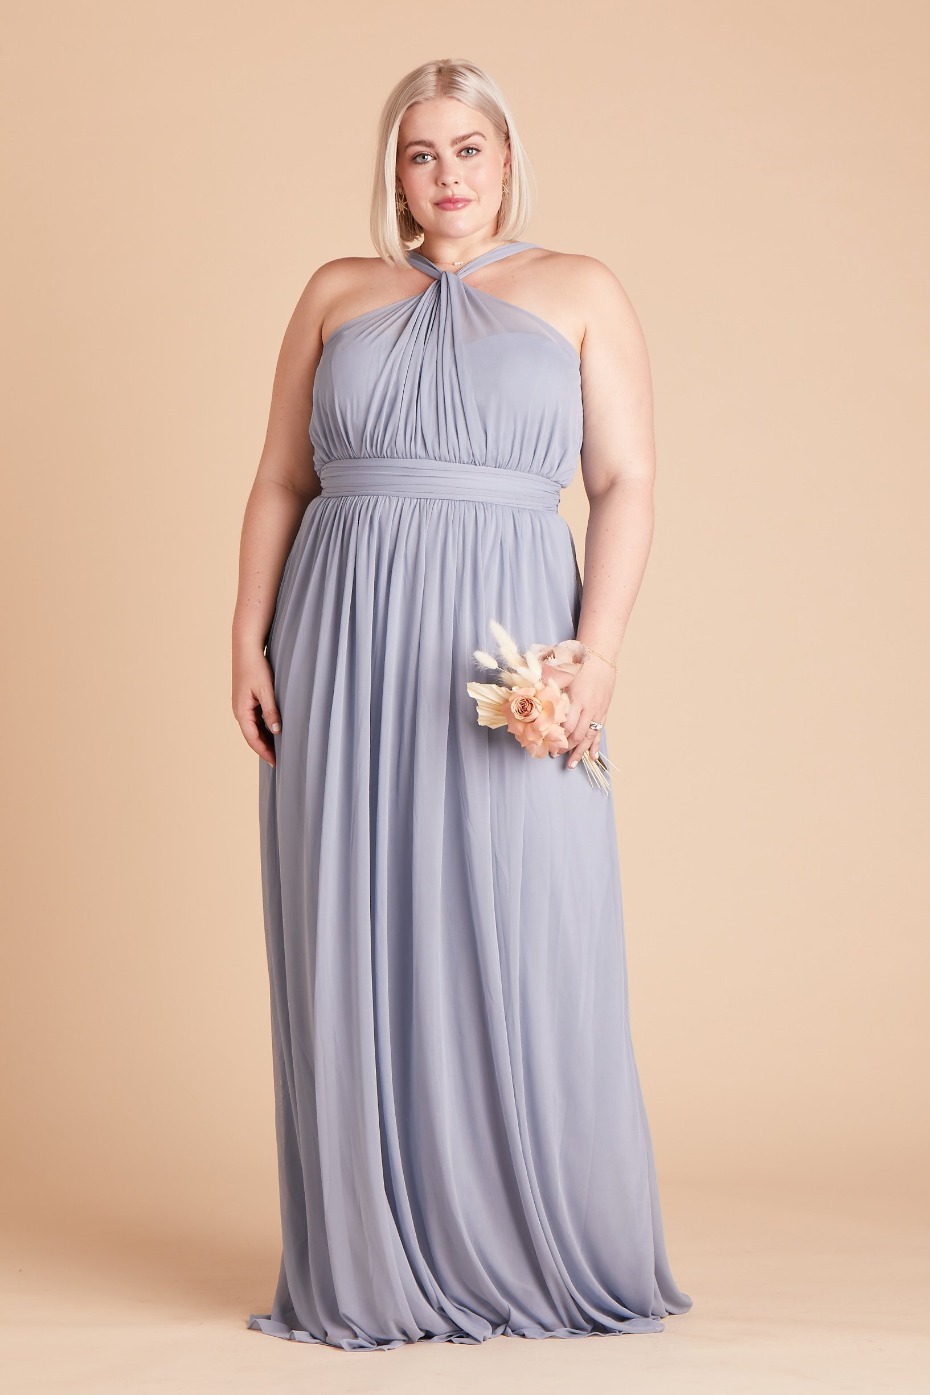 Bridesmaid Brands Doing Big Things With the Color Blue RN